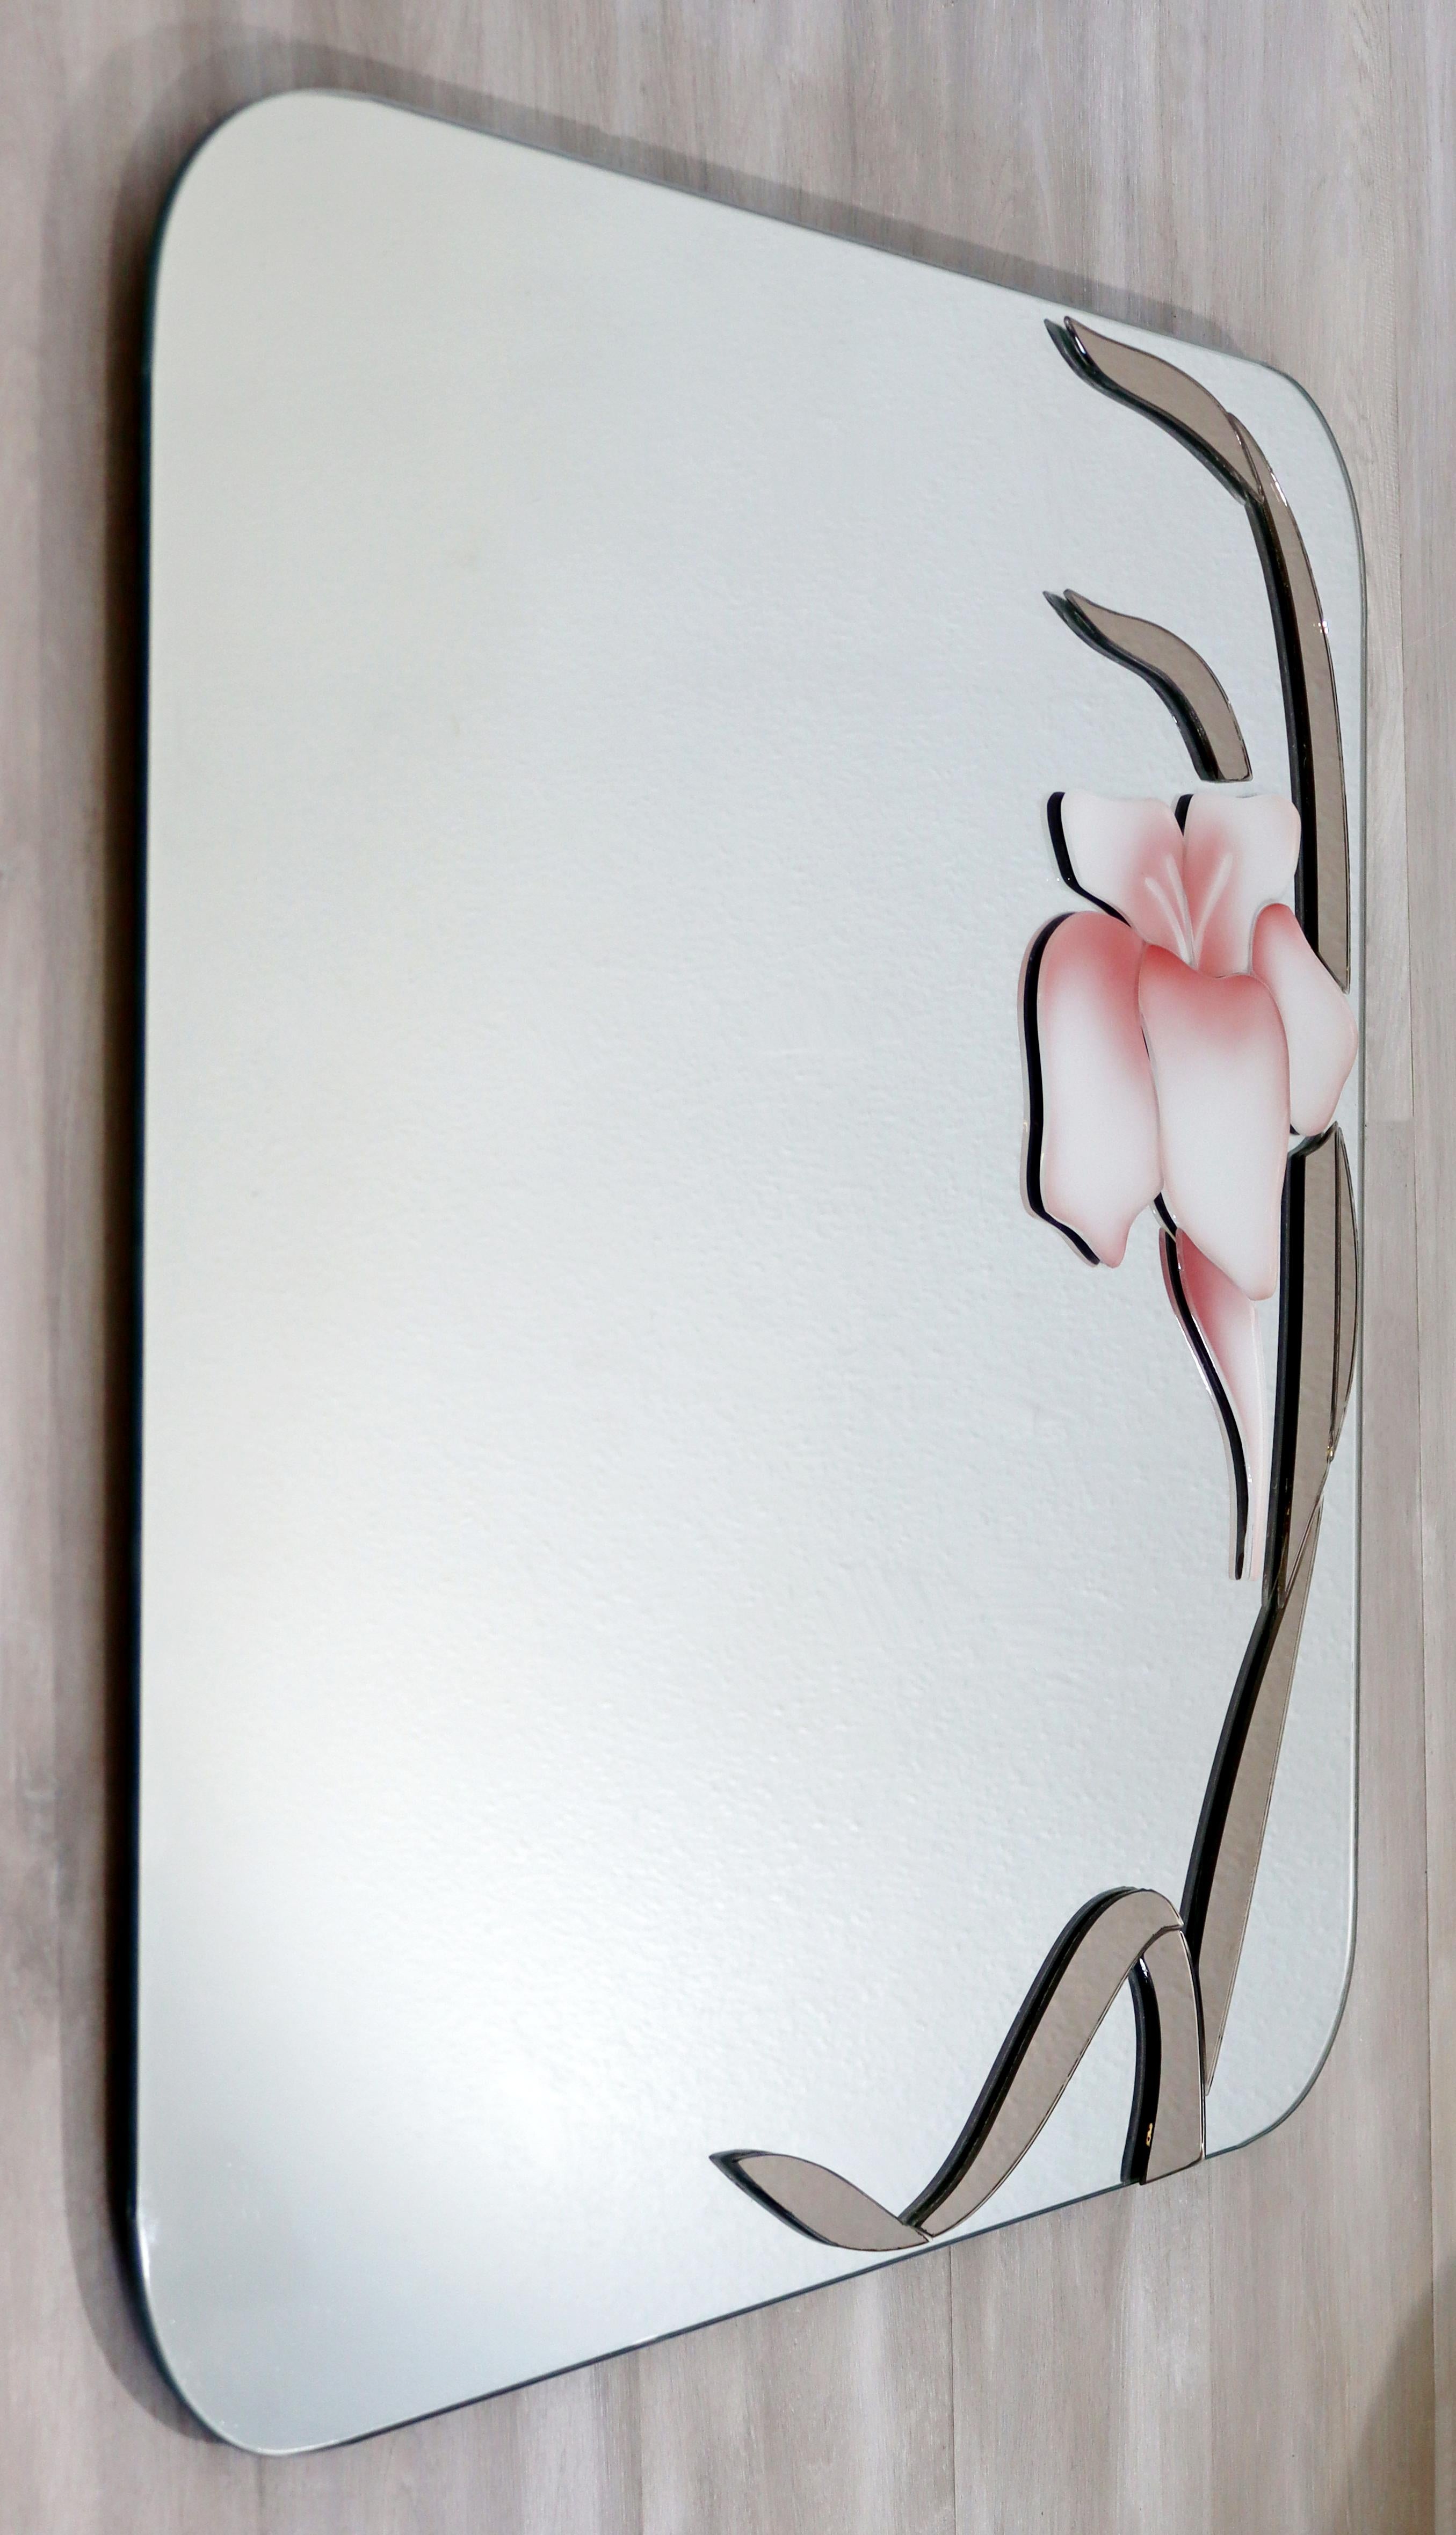 For your consideration is a stunning, square wall mirror, with a pink floral motif, signed by David Marshall, circa the 1980s. In excellent vintage condition. The dimensions are 29